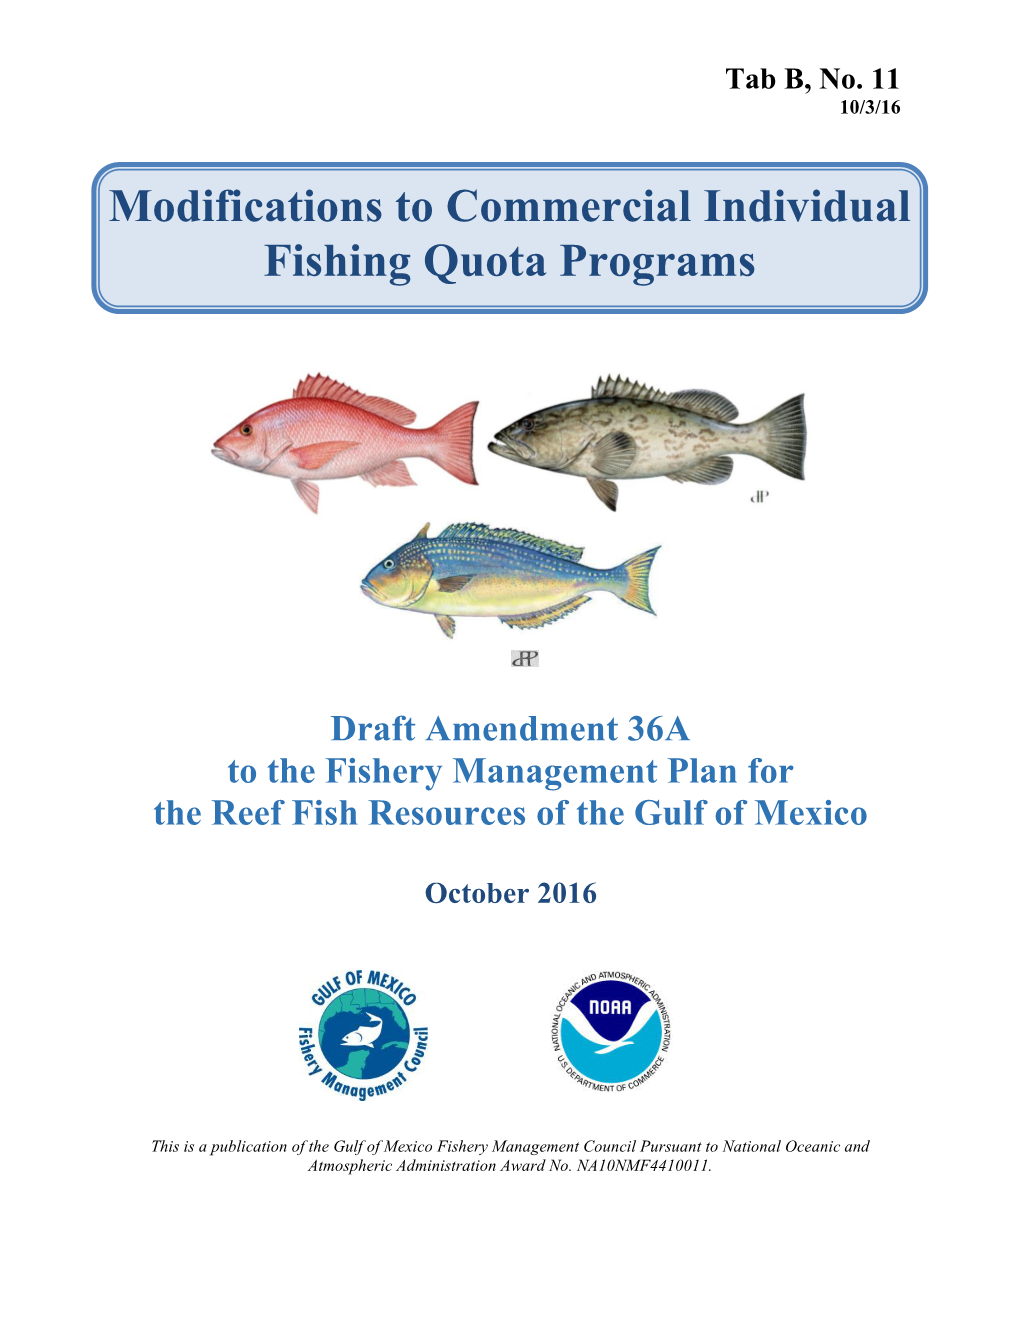 Modifications to Commercial Individual Fishing Quota Programs